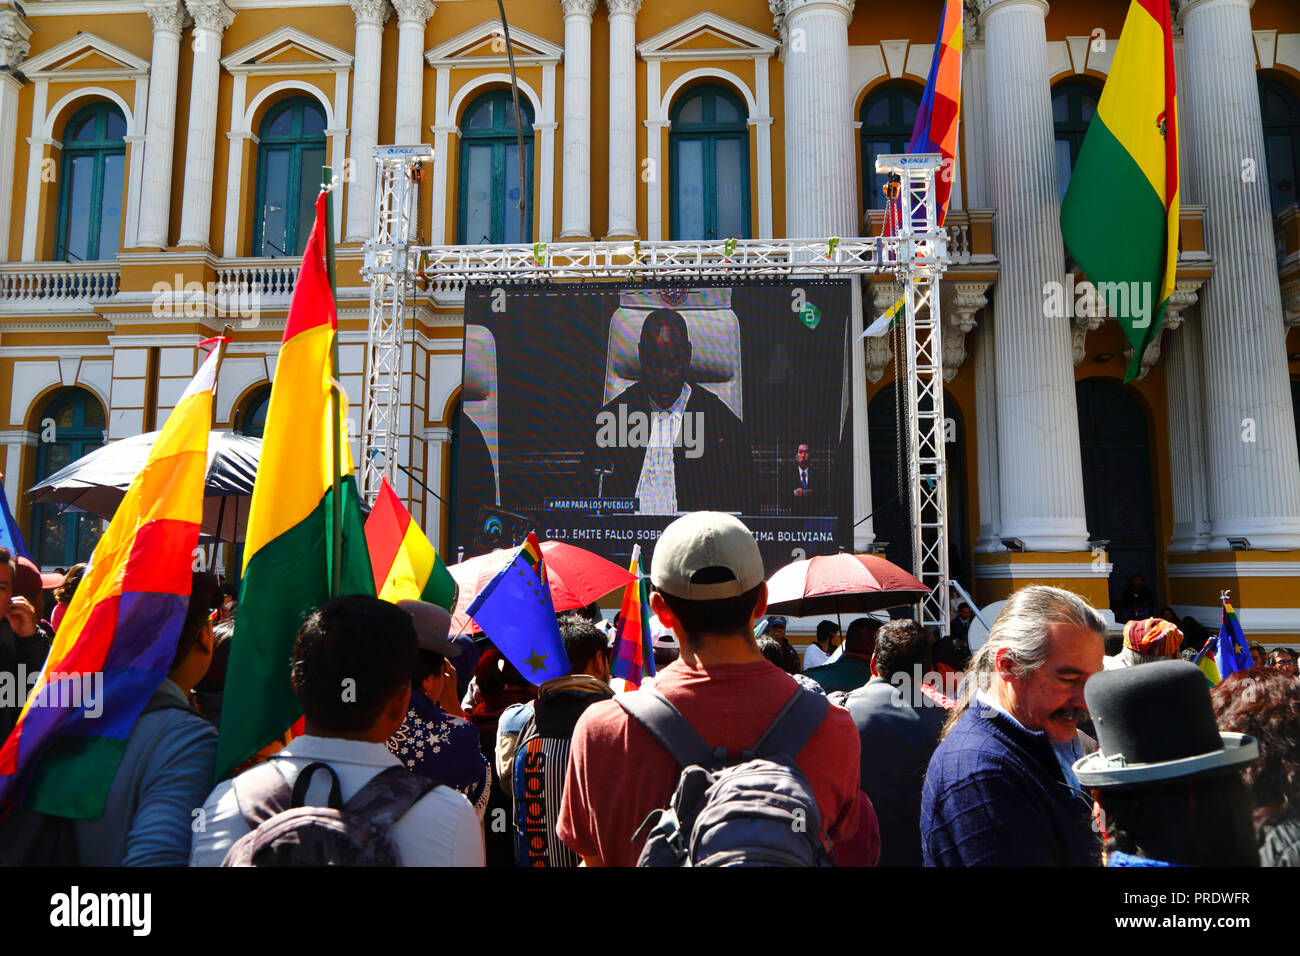 La Paz, Bolivia, 1st October 2018. People watch the ruling for the case "Obligation to Negotiate Access to the Pacific Ocean (Bolivia v. Chile)" at the International Court of Justice in The Hague on a giant screen in front of the Congress building in Plaza Murillo. Bolivia presented the case to the ICJ in 2013; Bolivia lost its coastal Litoral province to Chile during the War of the Pacific (1879-1884) and previous negotiations have made no progress from Bolivia's viewpoint. Credit: James Brunker/Alamy Live News Stock Photo